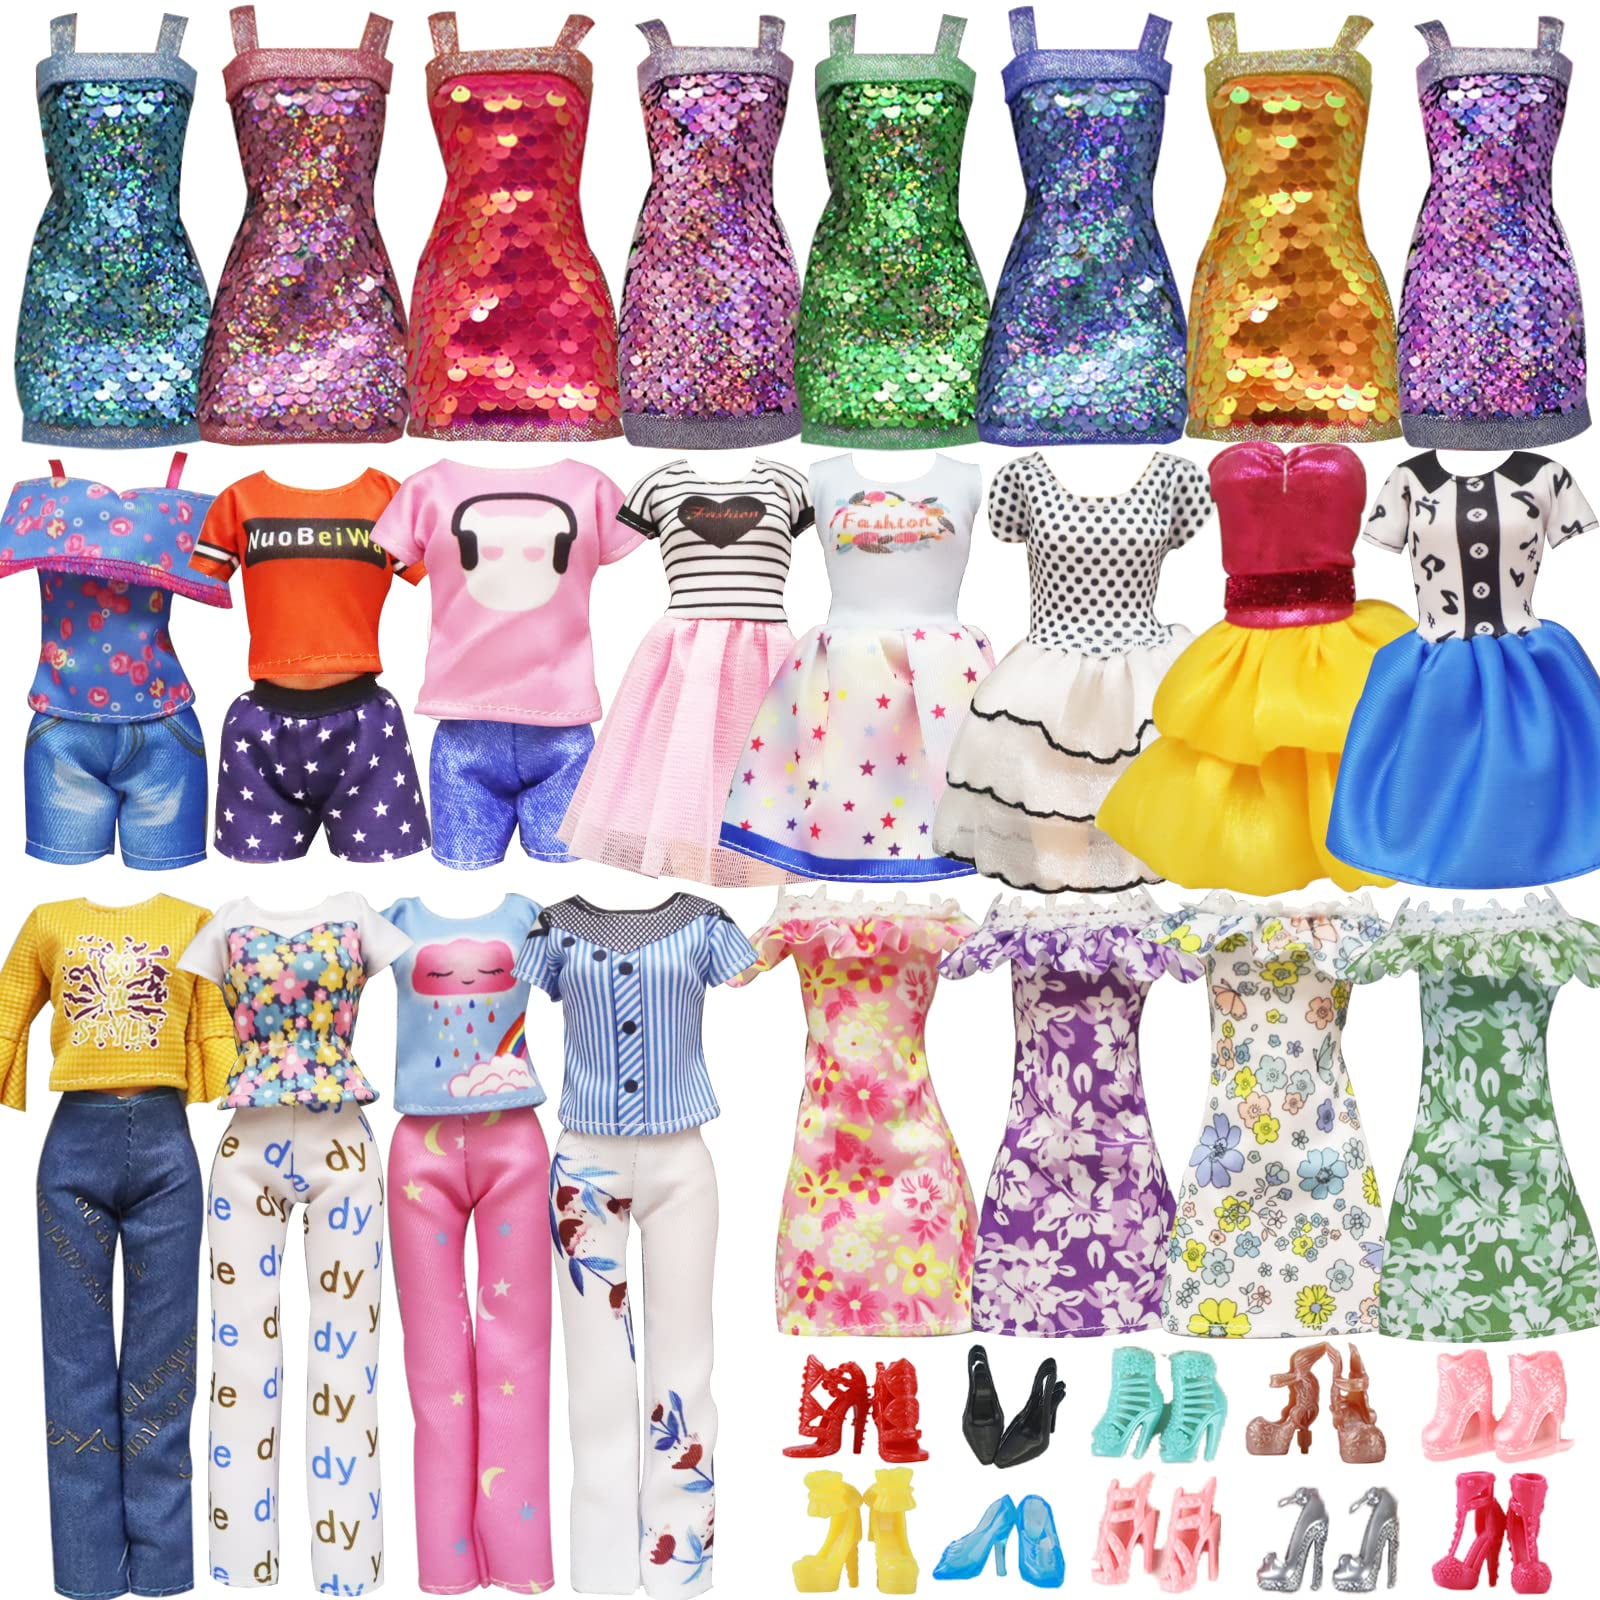 BM 41 Pieces Doll Clothes and Accessories for 11.5 Inch Girl Doll Include  15 Pcs Party Floral Dresses, 10 Pcs Shoes, 5 Pcs Bags, 11 Pcs Different  Doll